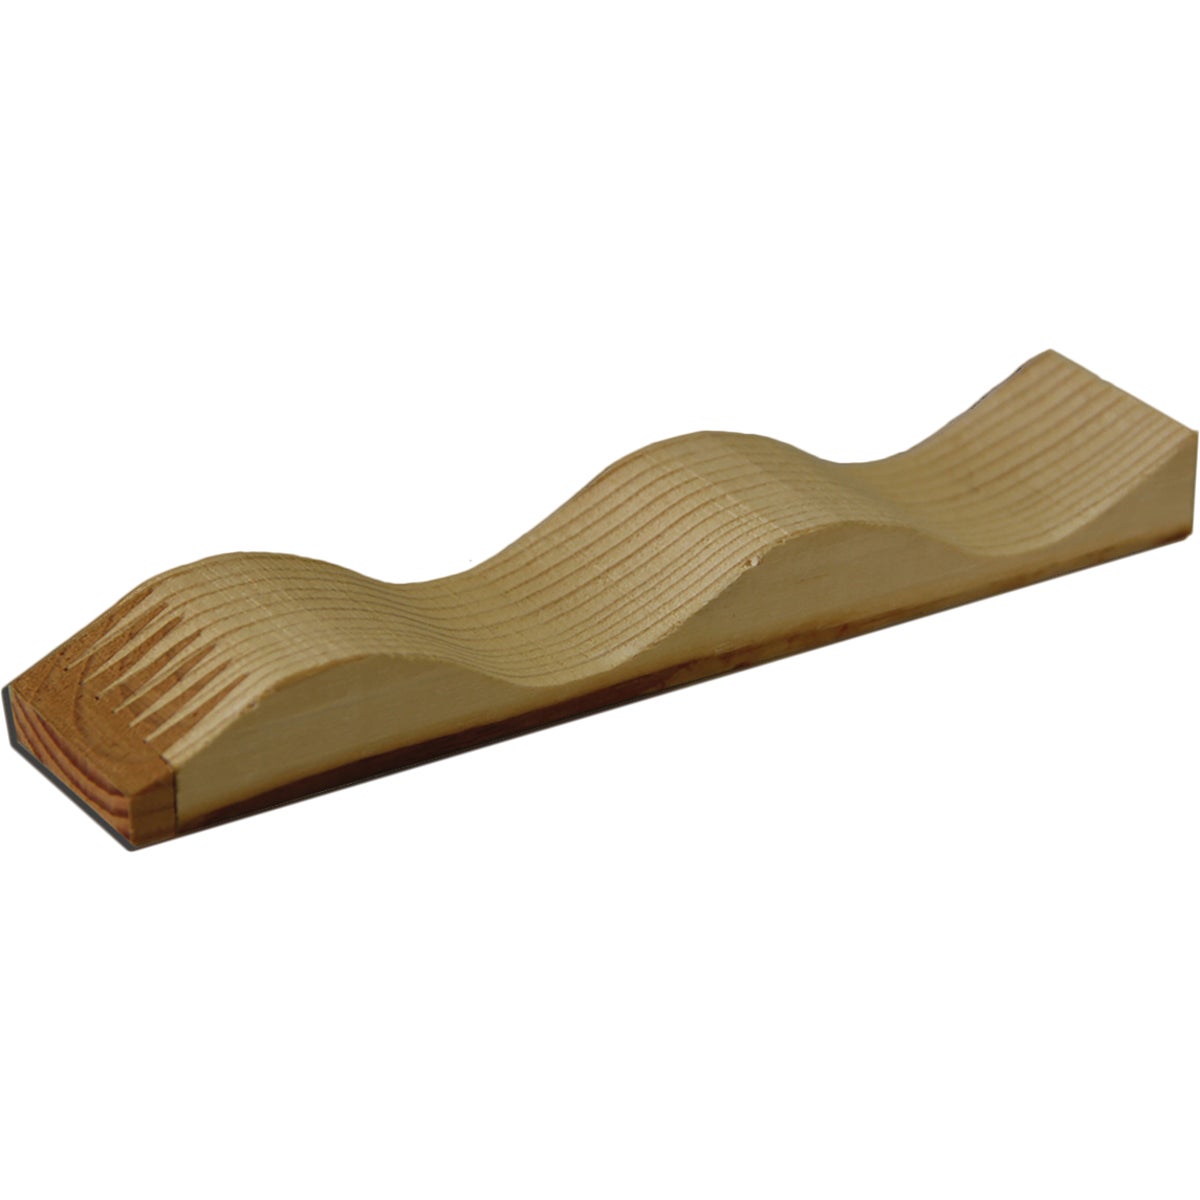 Item 120915, Horizontal wood strip for 2-1/2 In. standard corrugated panel.